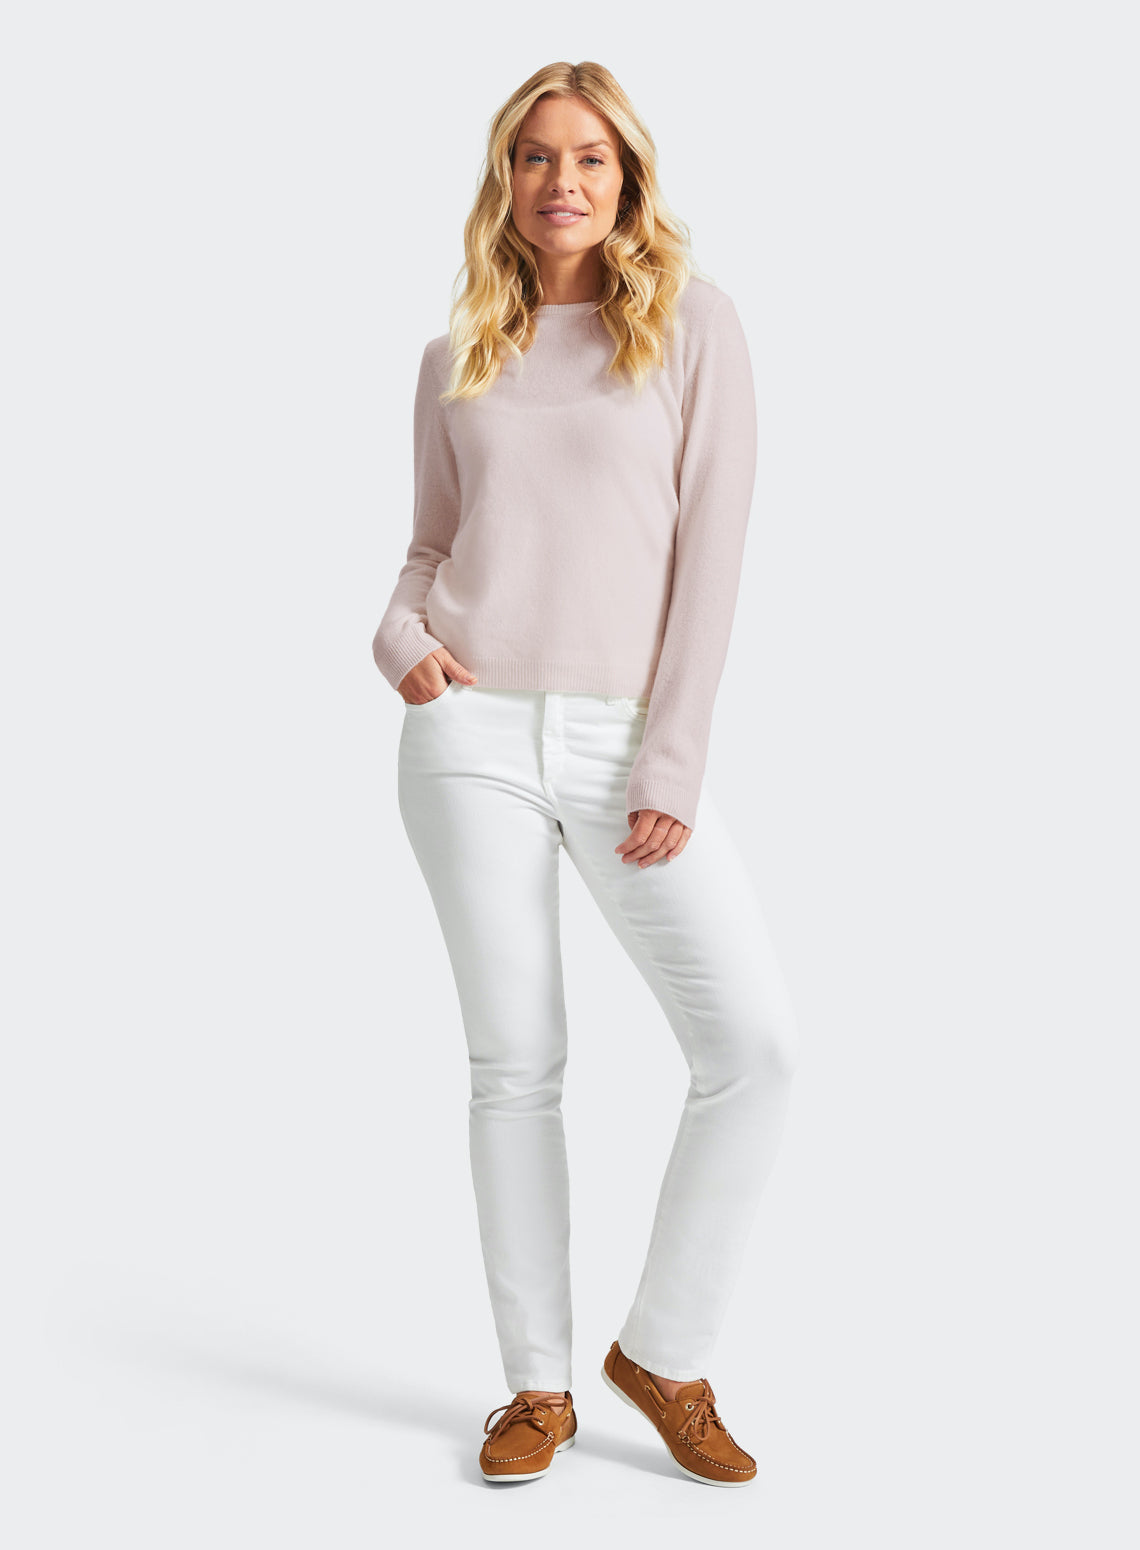 Cashmere Crew Neck in Pastel Pink